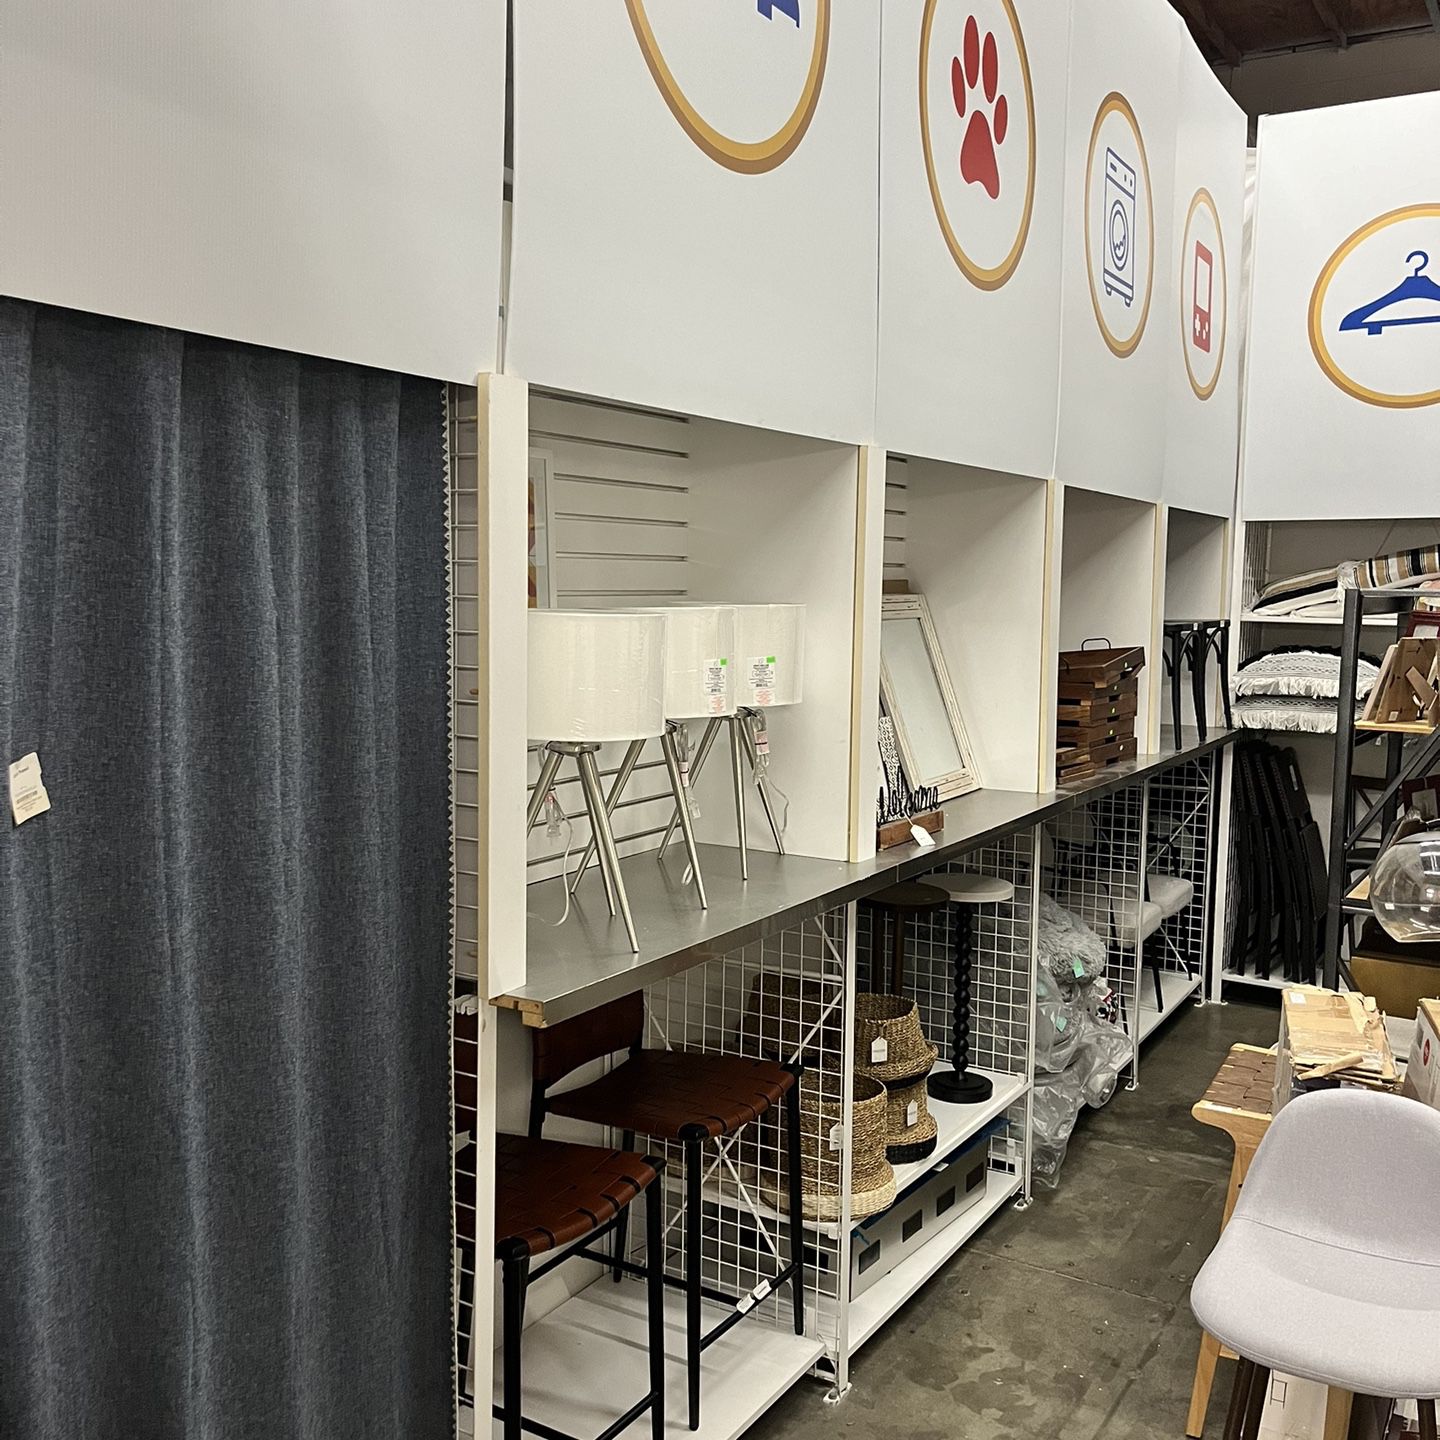 12'x 3' x 18" or 24 inch display shelves with slat wall inserts. Furniture/large item display islands Display shelves Slatwall islands with shelves an